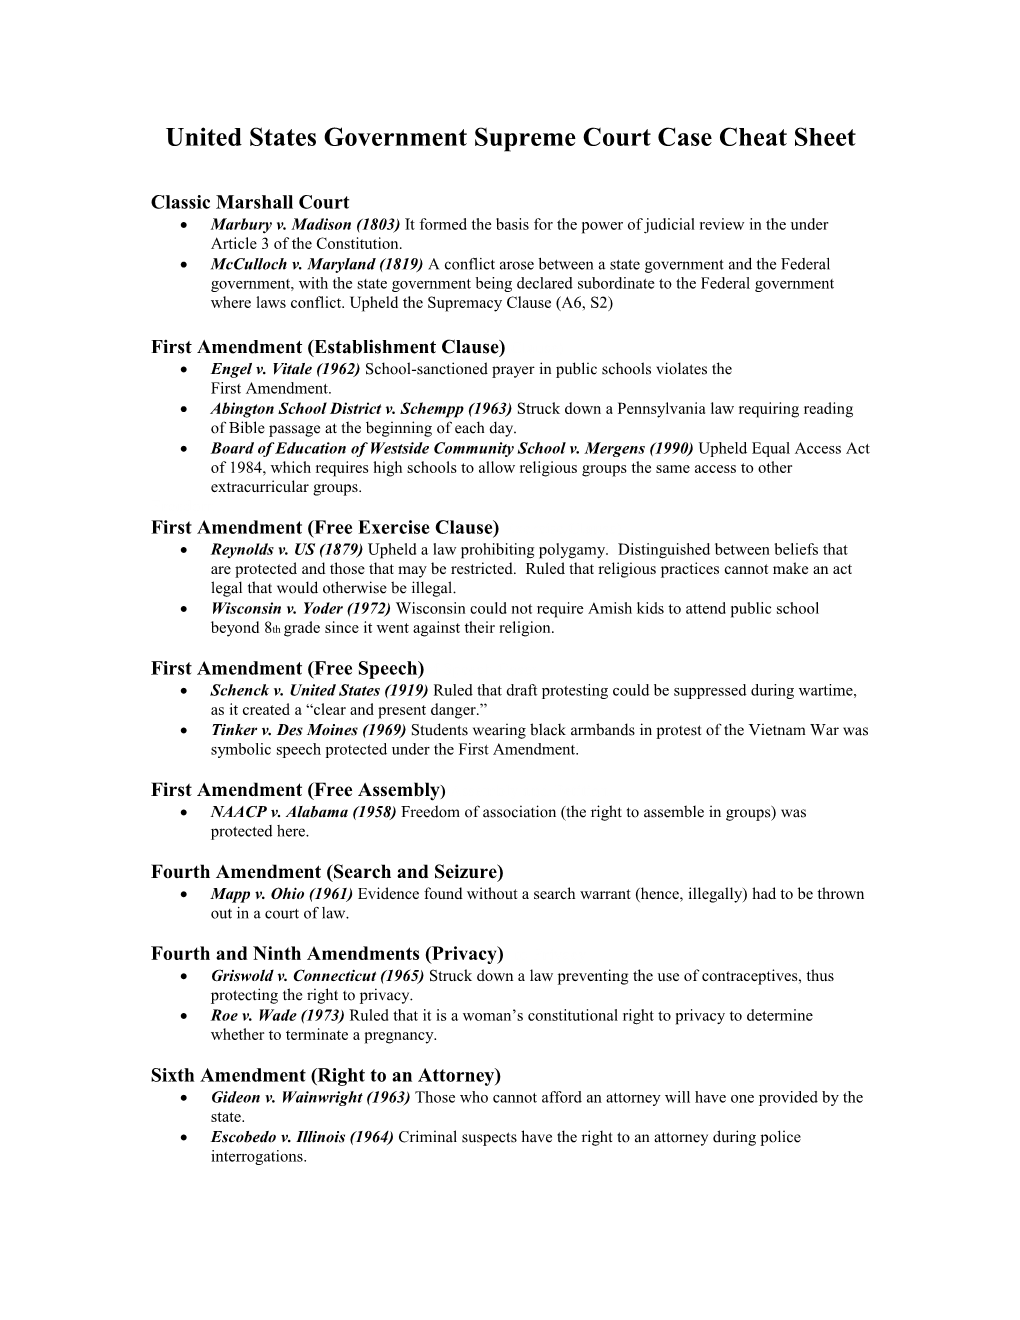 Advanced Placement United States Government Supreme Court Case Cheat Sheet